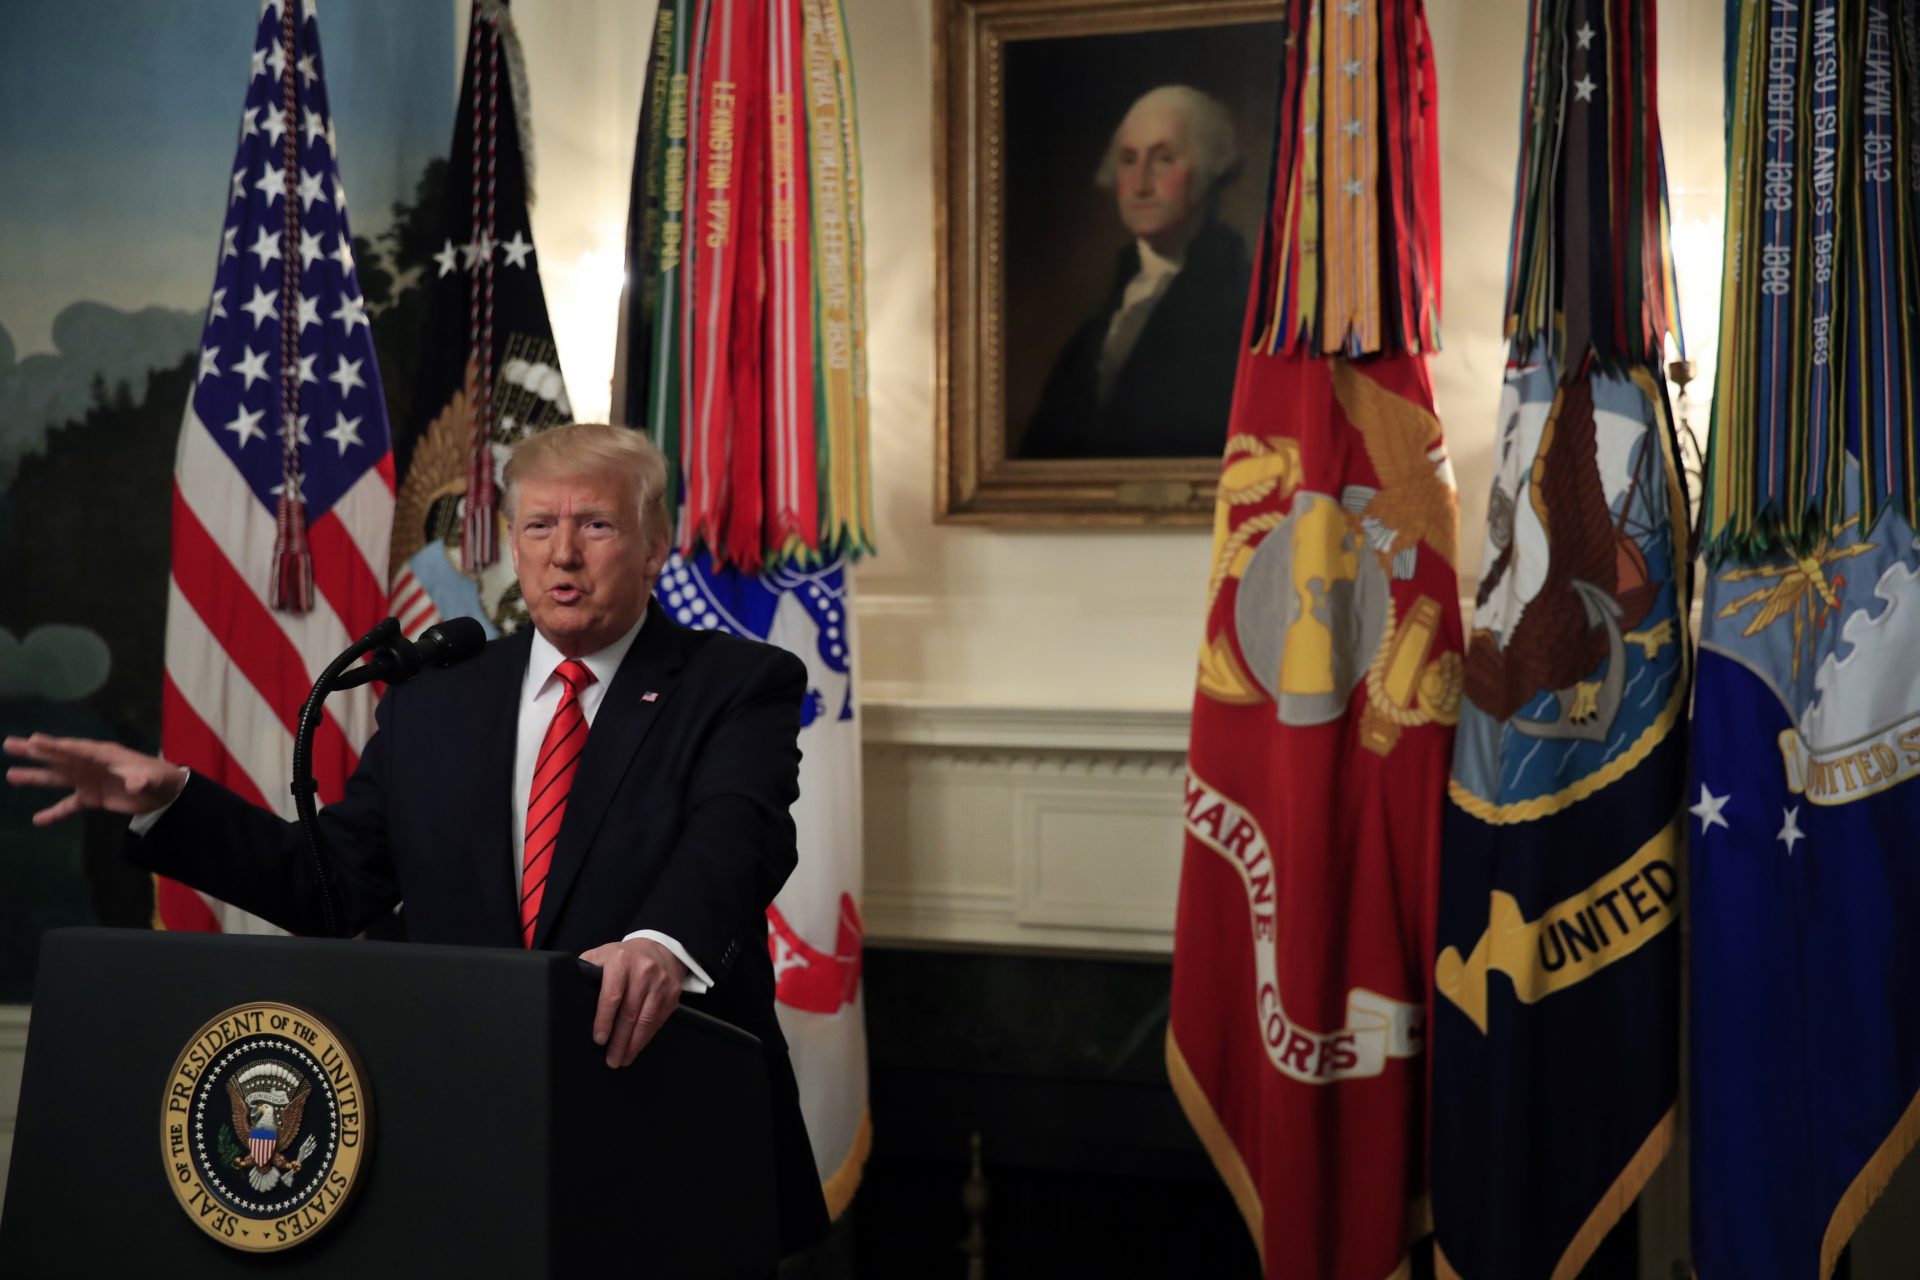 President Donald Trump speaks in the Diplomatic Room of the White House, Sunday, Oct. 27, 2019 in Washington. Trump says Islamic State group leader Abu Bakr al-Baghdadi died after running into a dead-end tunnel and igniting an explosive vest, killing himself and three of his young children,